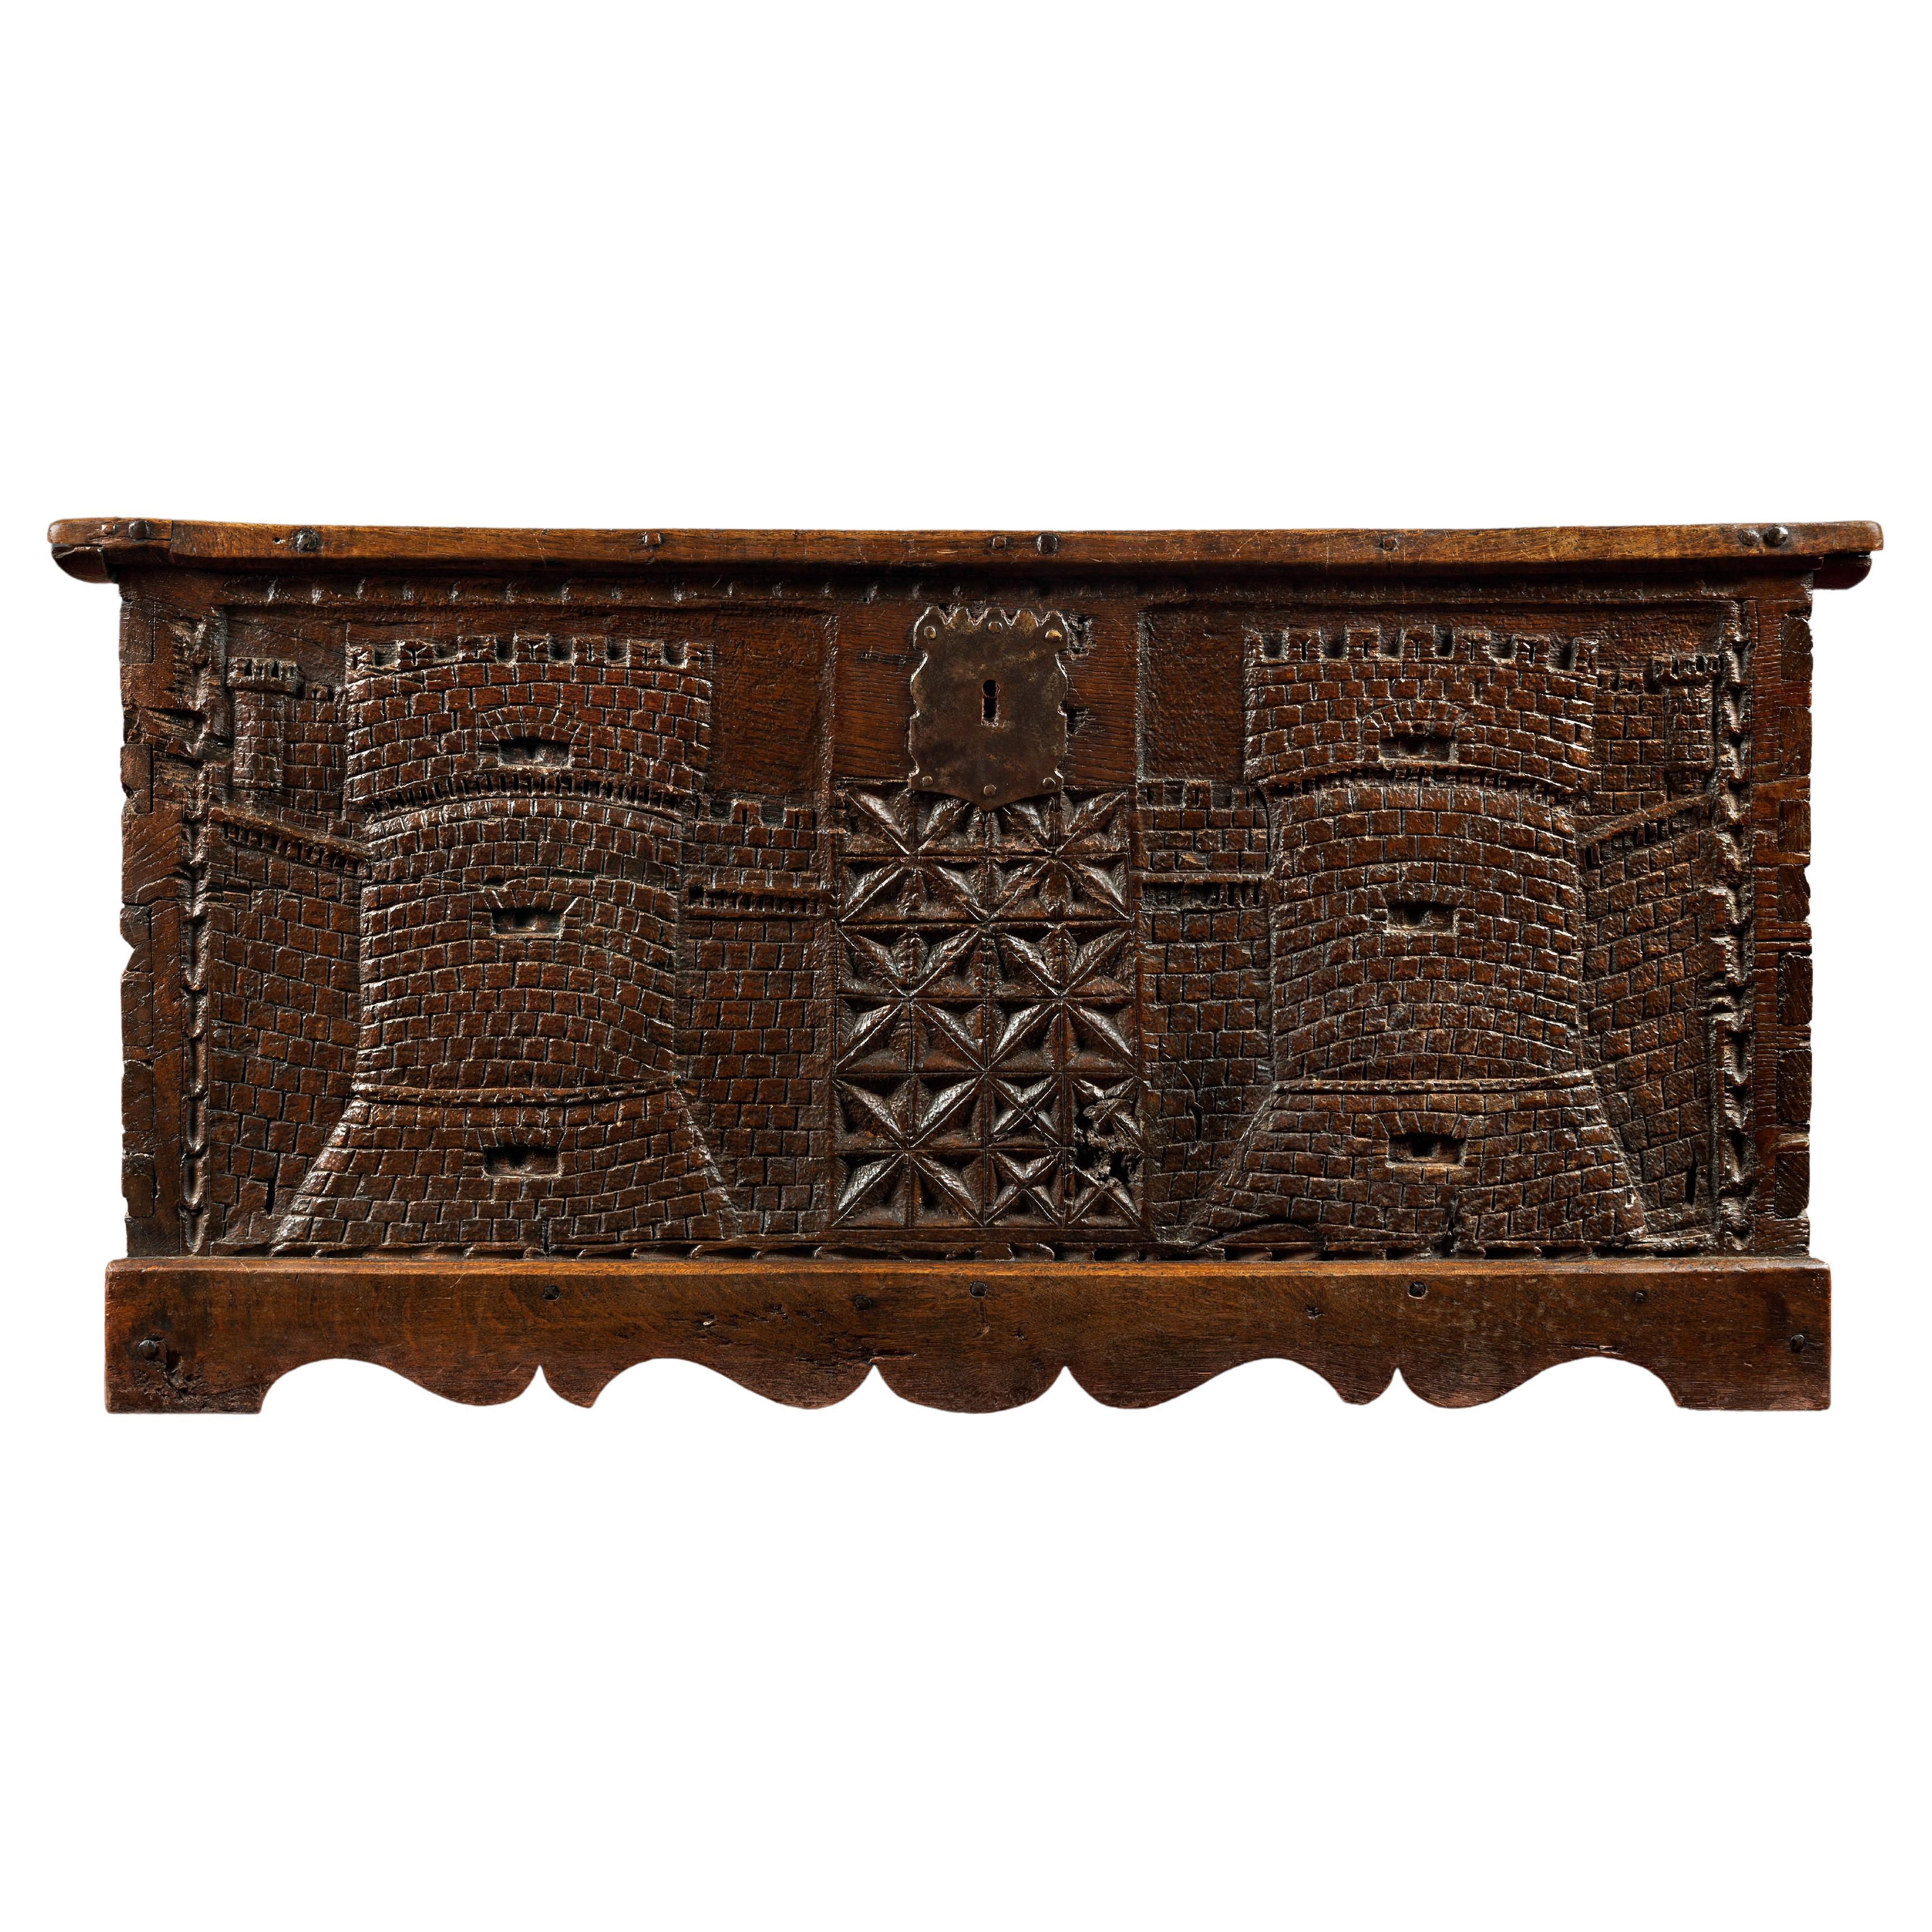 Wooden Chest Carved with Two Crenellated Towers